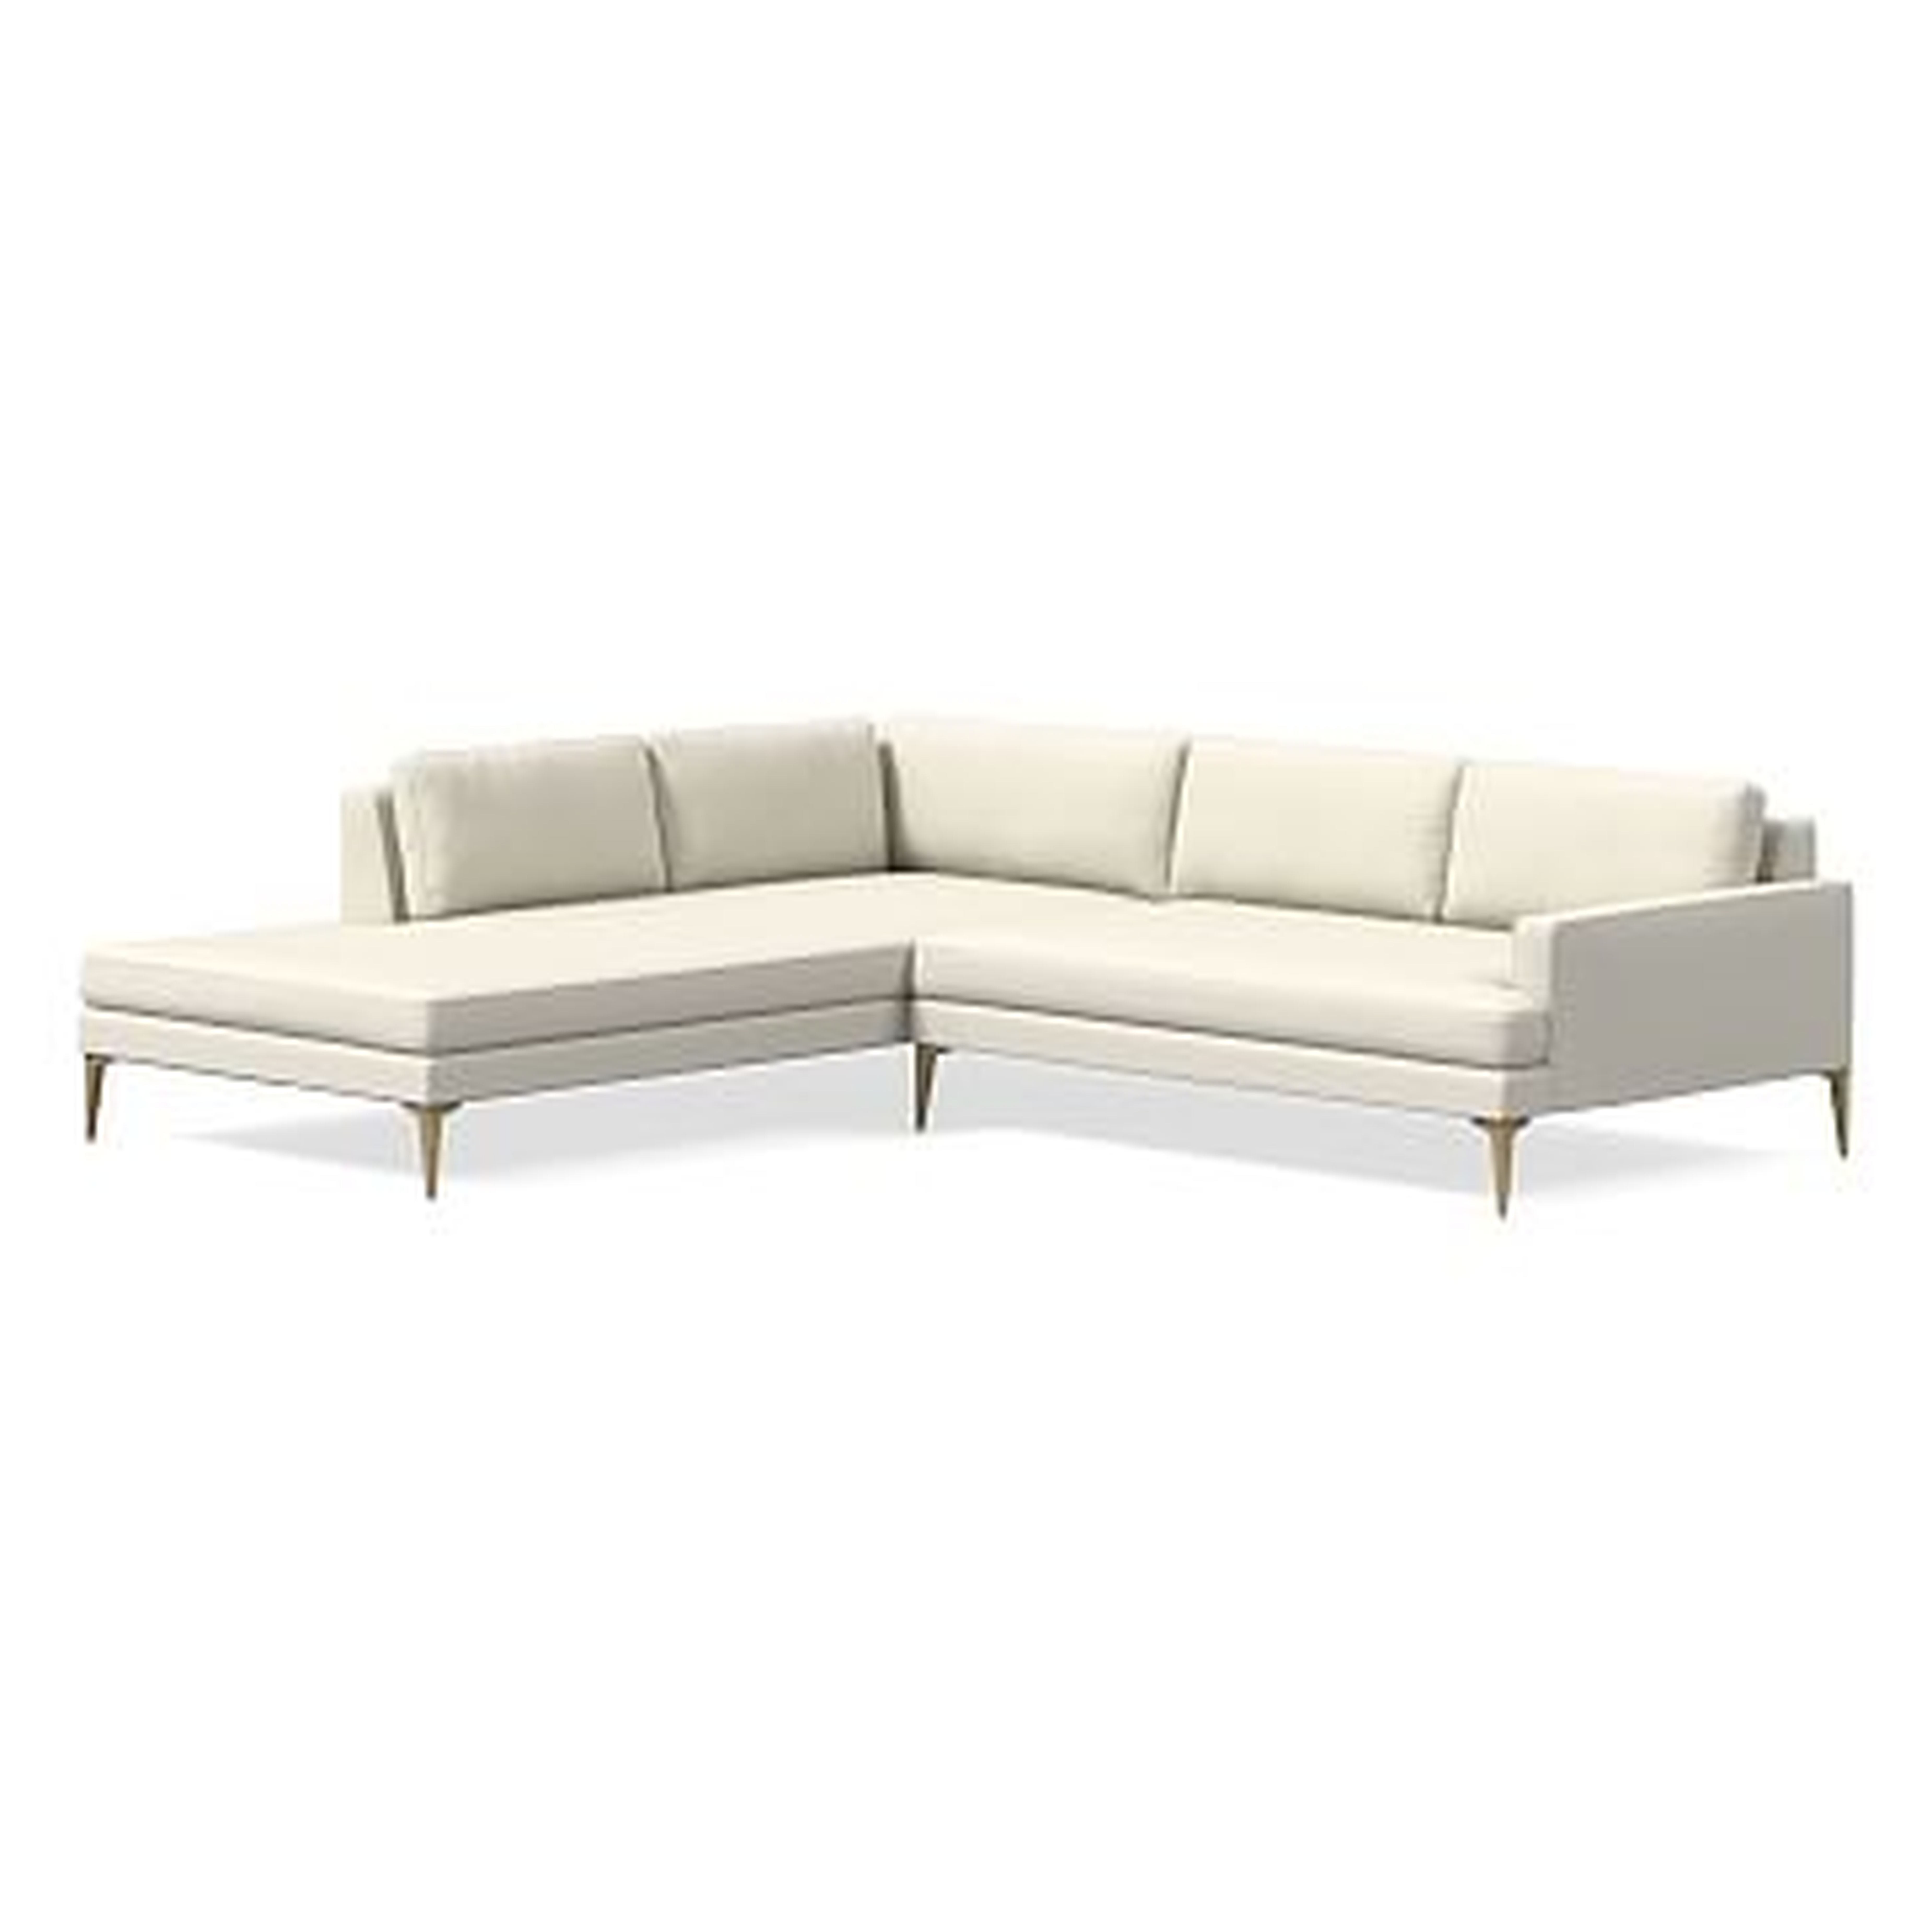 Andes Sectional Set 34: XL Right Arm 2.5 Seater Sofa, XL Left Arm Terminal Chaise, Luxe Boucle, Stone White, Blackened Brass - West Elm